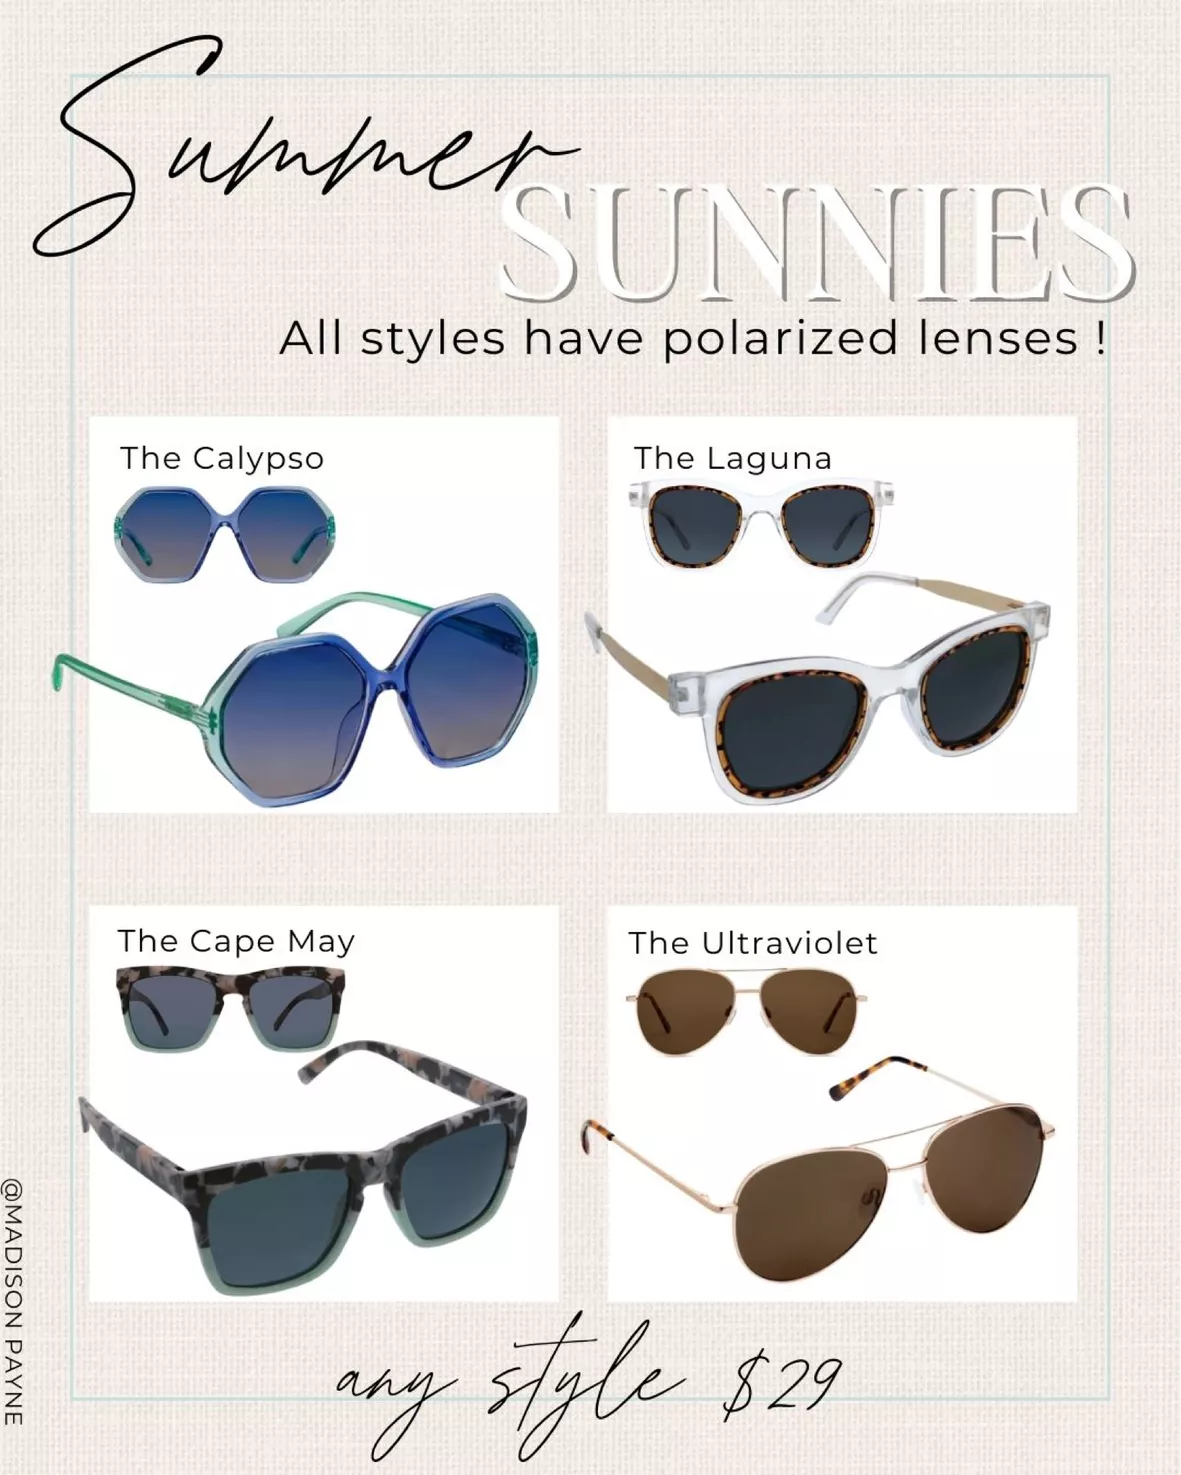 All About The Types of Sunglasses